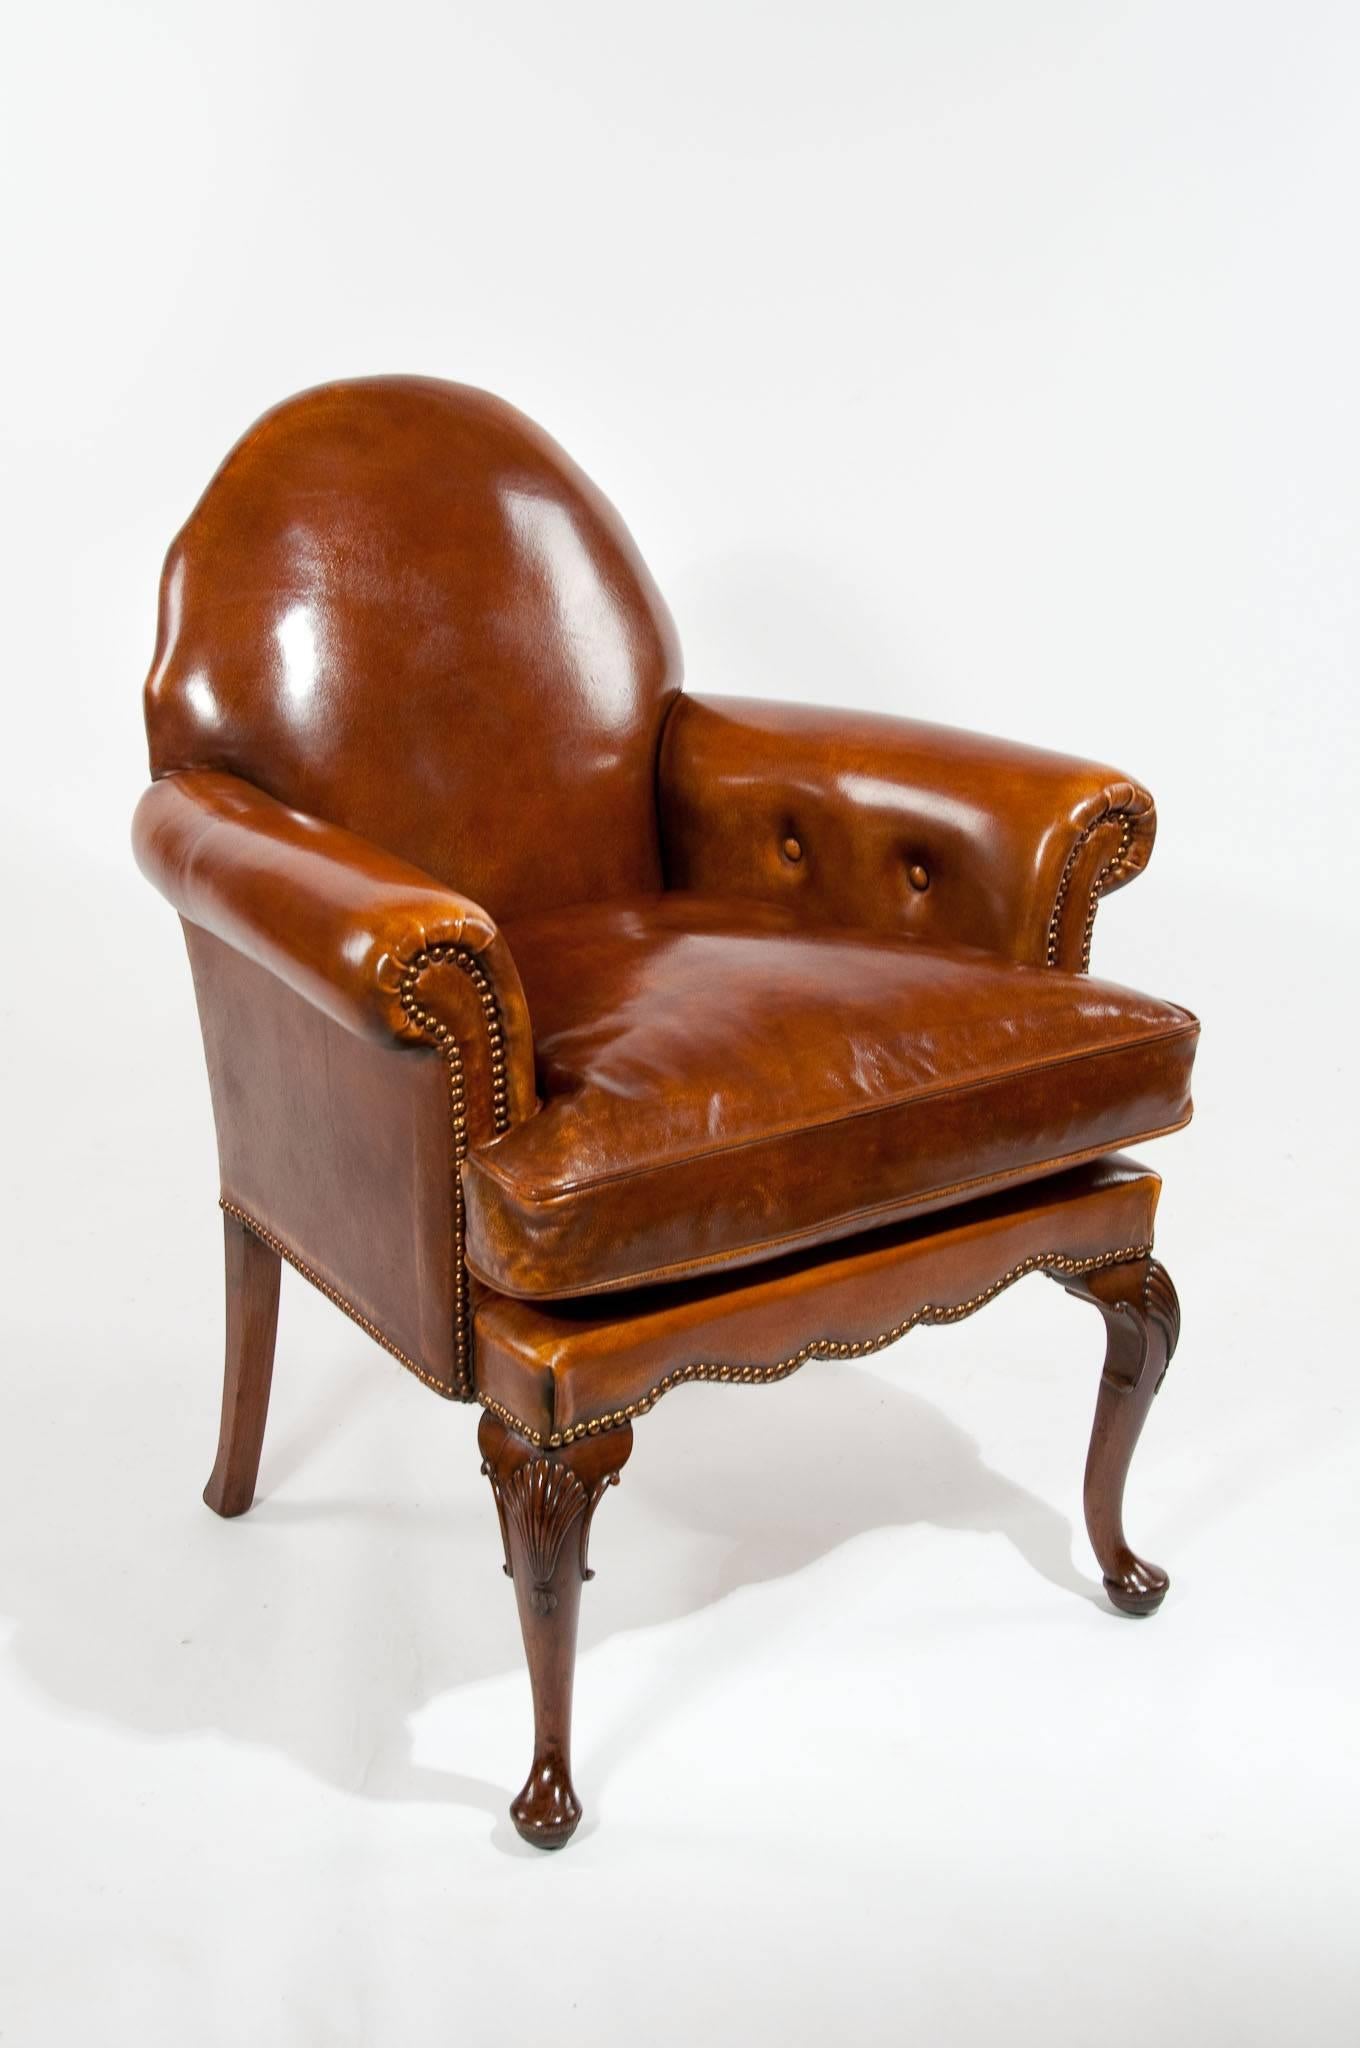 A well proportioned antique walnut cabriole legged leather upholstered armchair. This very attractive leather desk / armchair has a wonderful shaped back with scrolling arms and feather down cushion all upholstered in a first class hand dyed leather